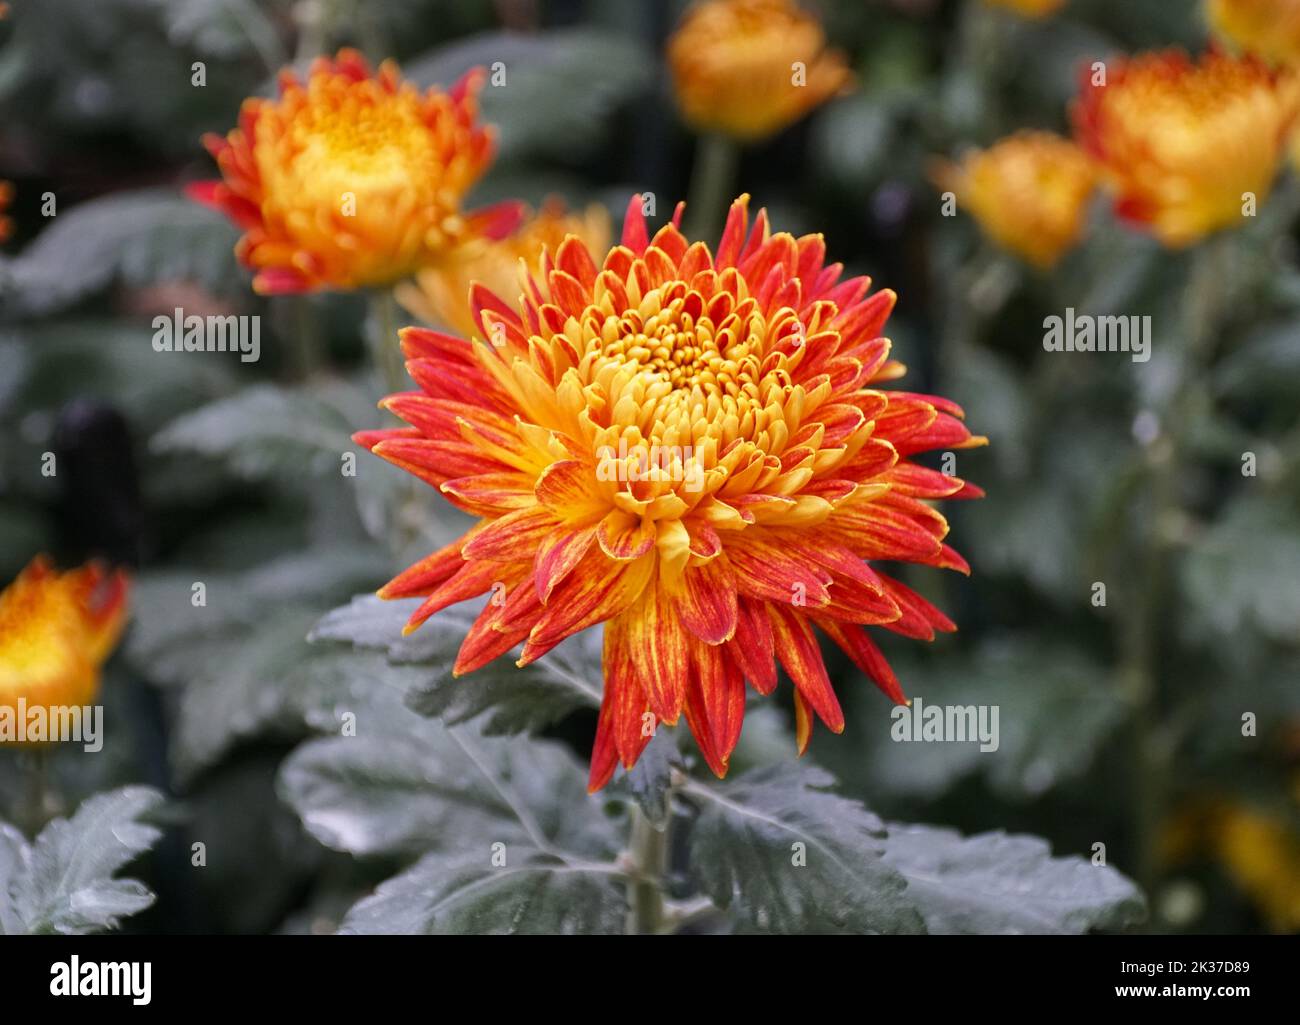 Close up of the red and yellow color of decorative mum 'Western Bushfire' flower Stock Photo